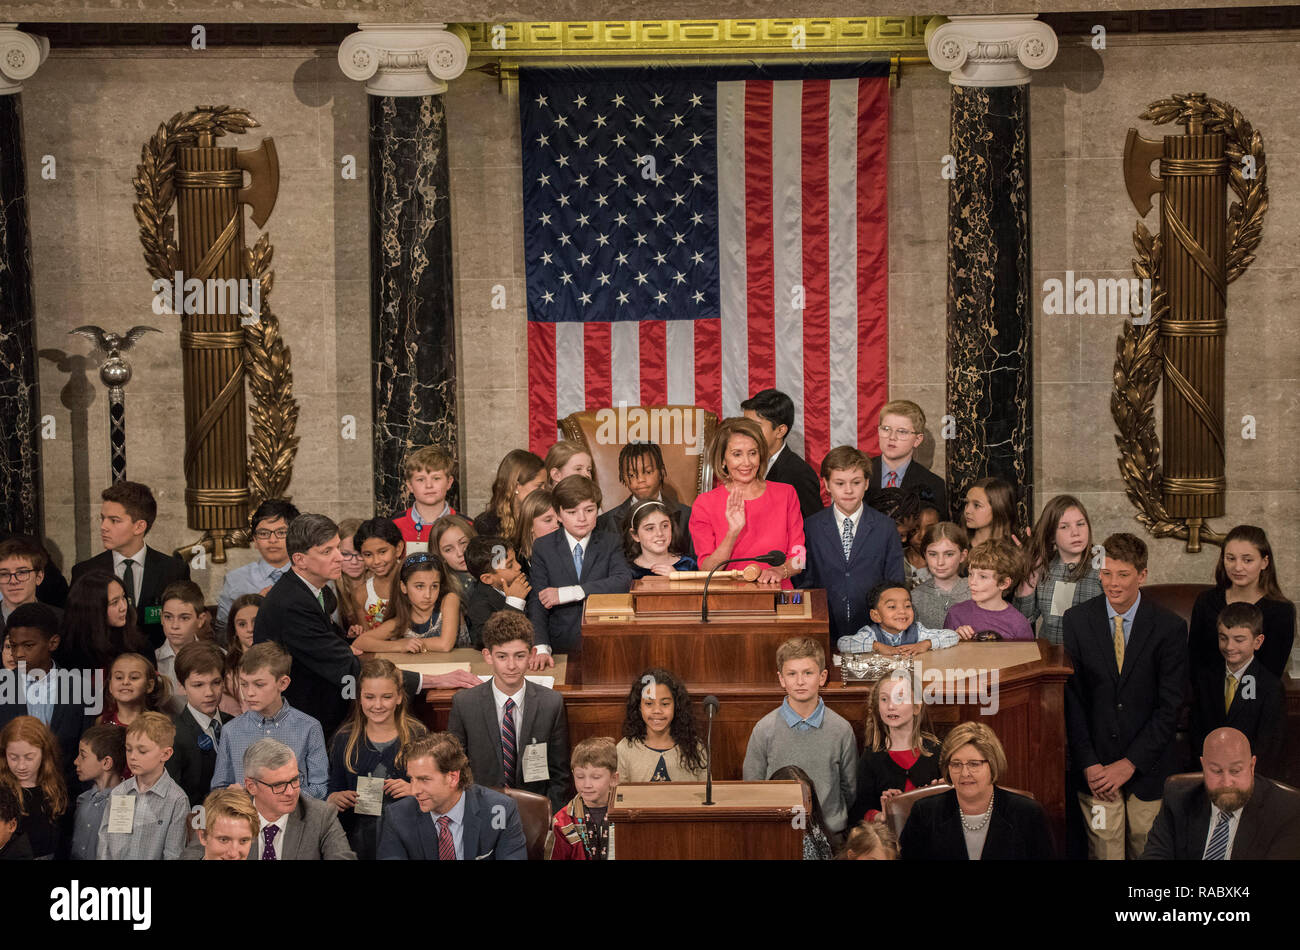 Washington DC, USA. 3rd January, 2019. Nancy Pelosi becomes the new Speaker of the House as the Democrates take the majority of seats in the House of Respresentatives.  Pelosi invited the children of the House Members to join her on  the Speaker's dias. Credit: Patsy Lynch/Alamy Live News Stock Photo